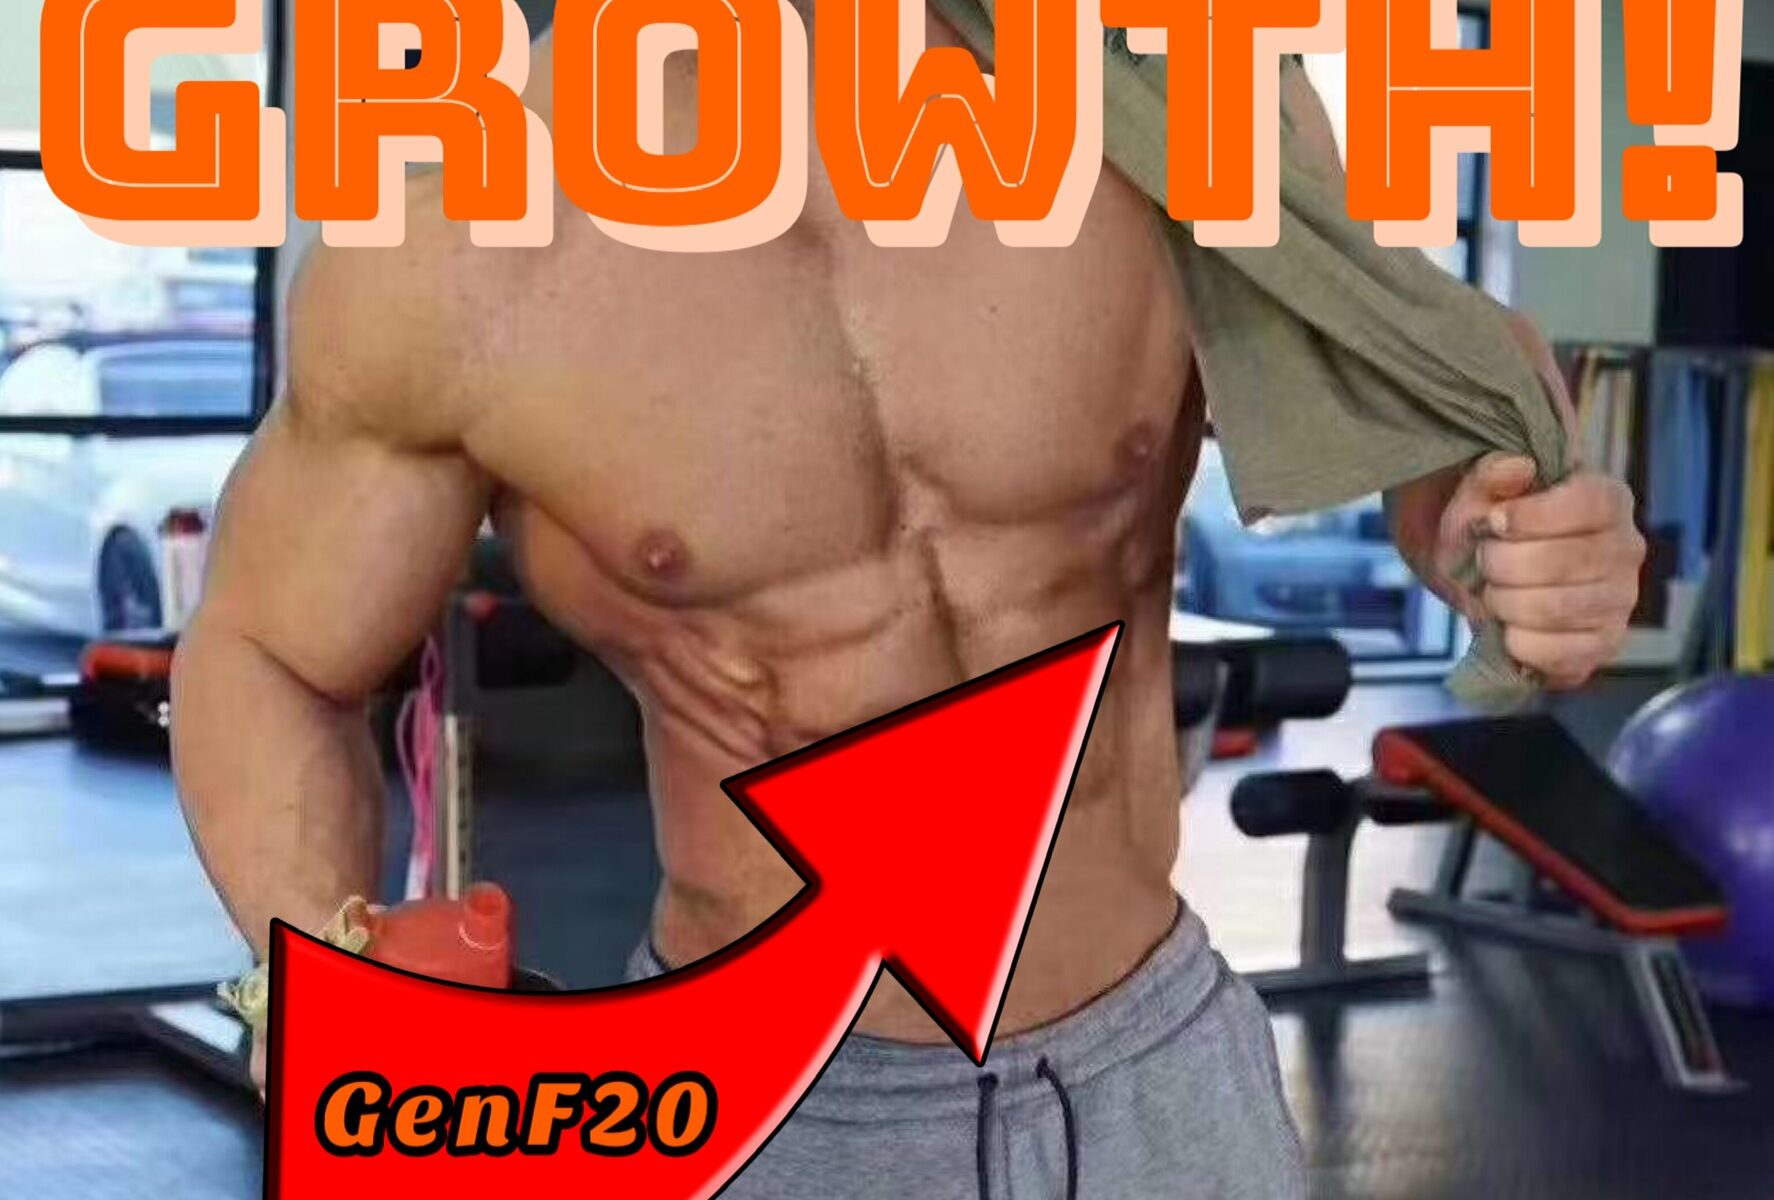 GENf20 HGH natural growth